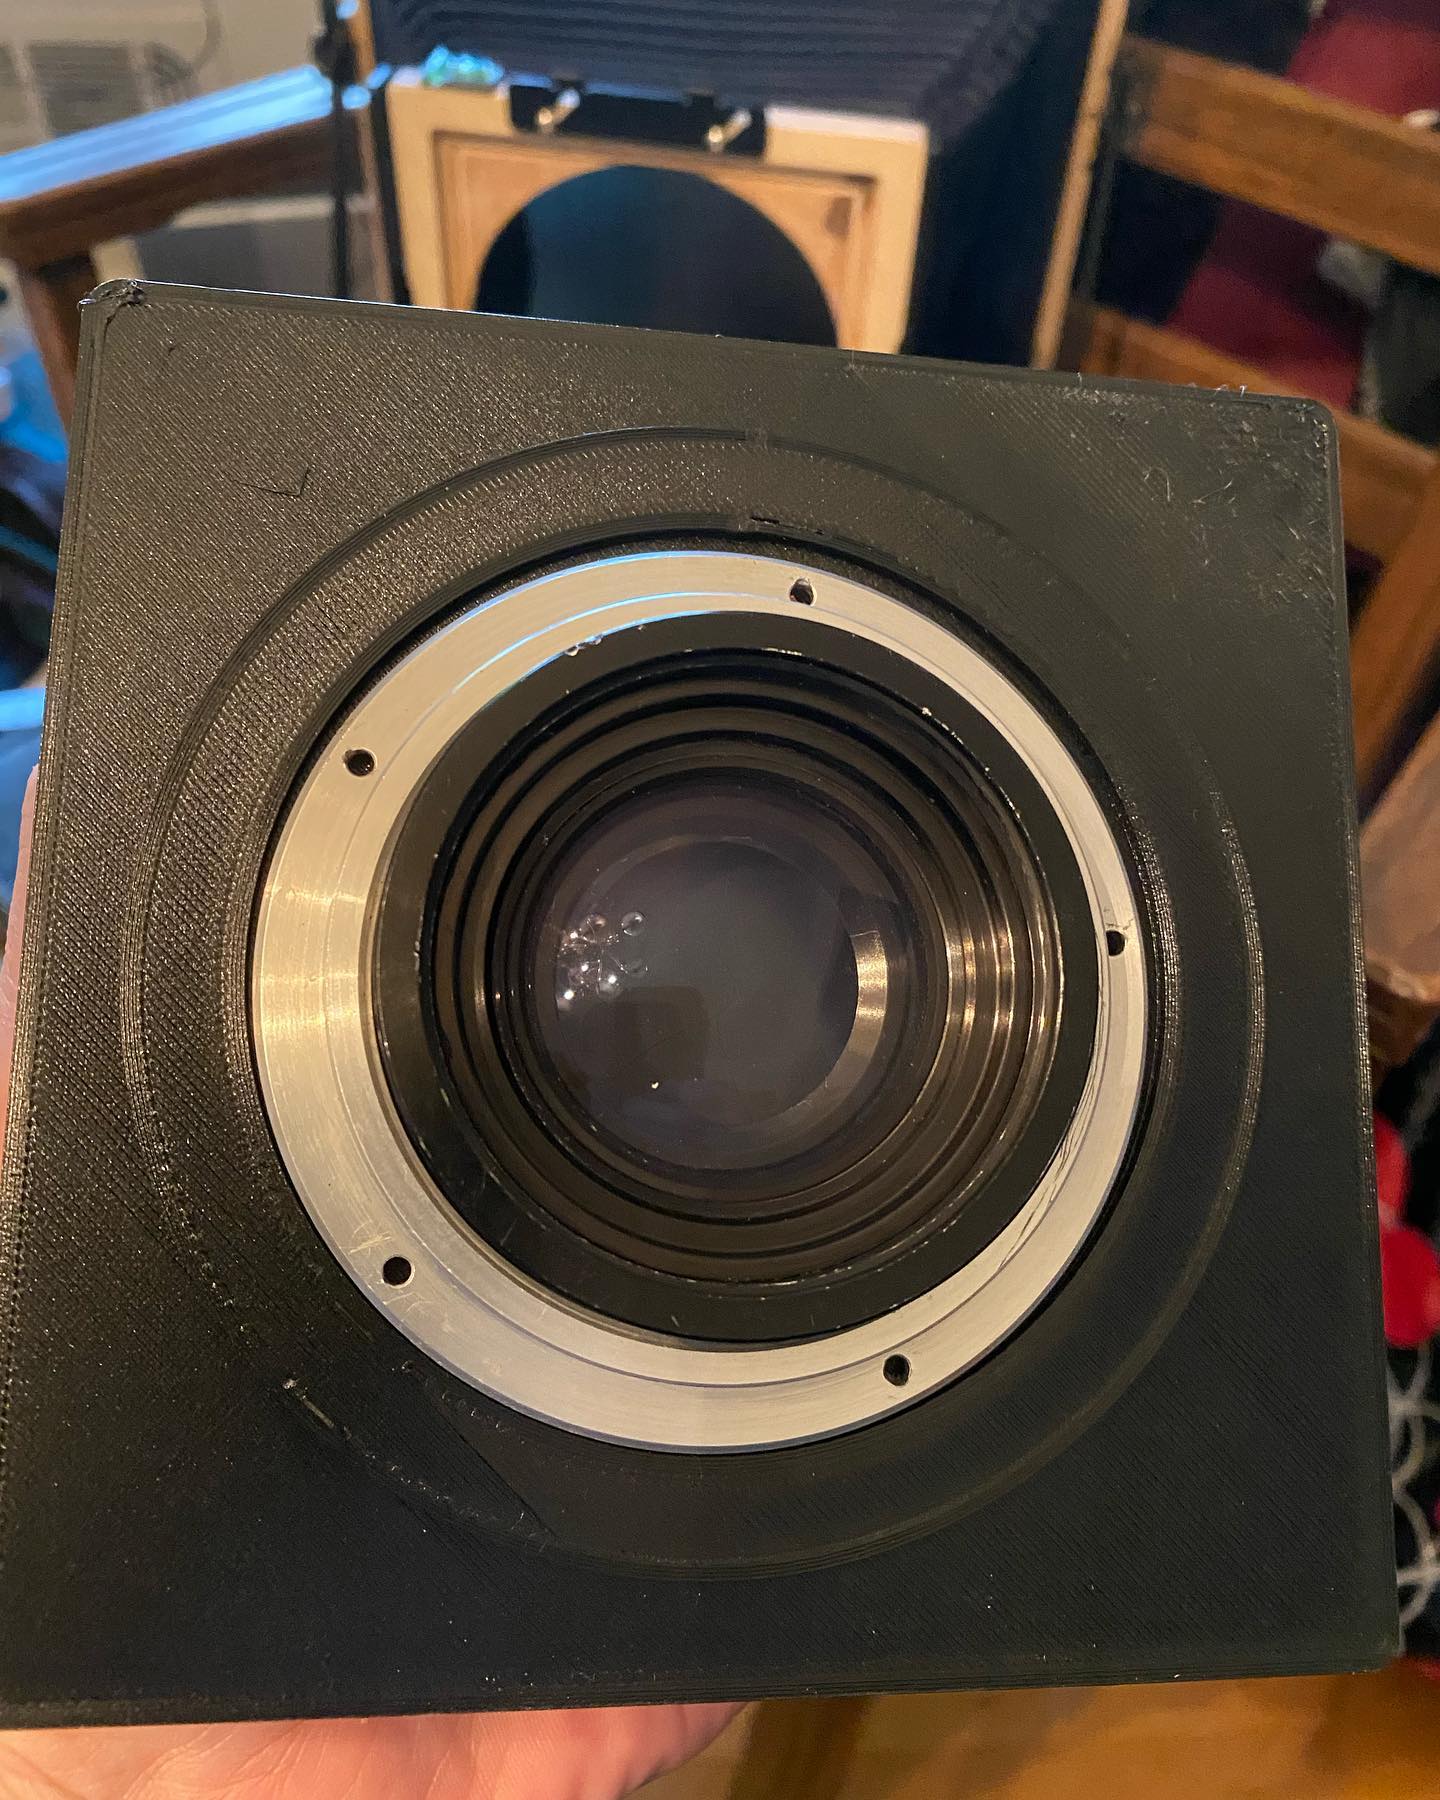 3D printed lens board for my @intrepidcamera 8x10. I had a hard time finding a board that would fit the Ilex No. 4 shutter that came with the Kodak Wide Field Ektar 190mm/f6.3 lens I picked up recently. So I opened up Fusion 360 and made one, which I then printed on my Ender 3 Pro. First attempt didnât work; the hole was based on some specs I read online and was too small, and I hadnât accounted for the rounded corners. Also it wasnât quite thick enough and so wasnât rigid enough. So back to Fusion 360, doubled the thickness to 4mm and added a circle to the back for another 2mm of support. The result looks promising. Will have to take the camera out this week and see if it worked.